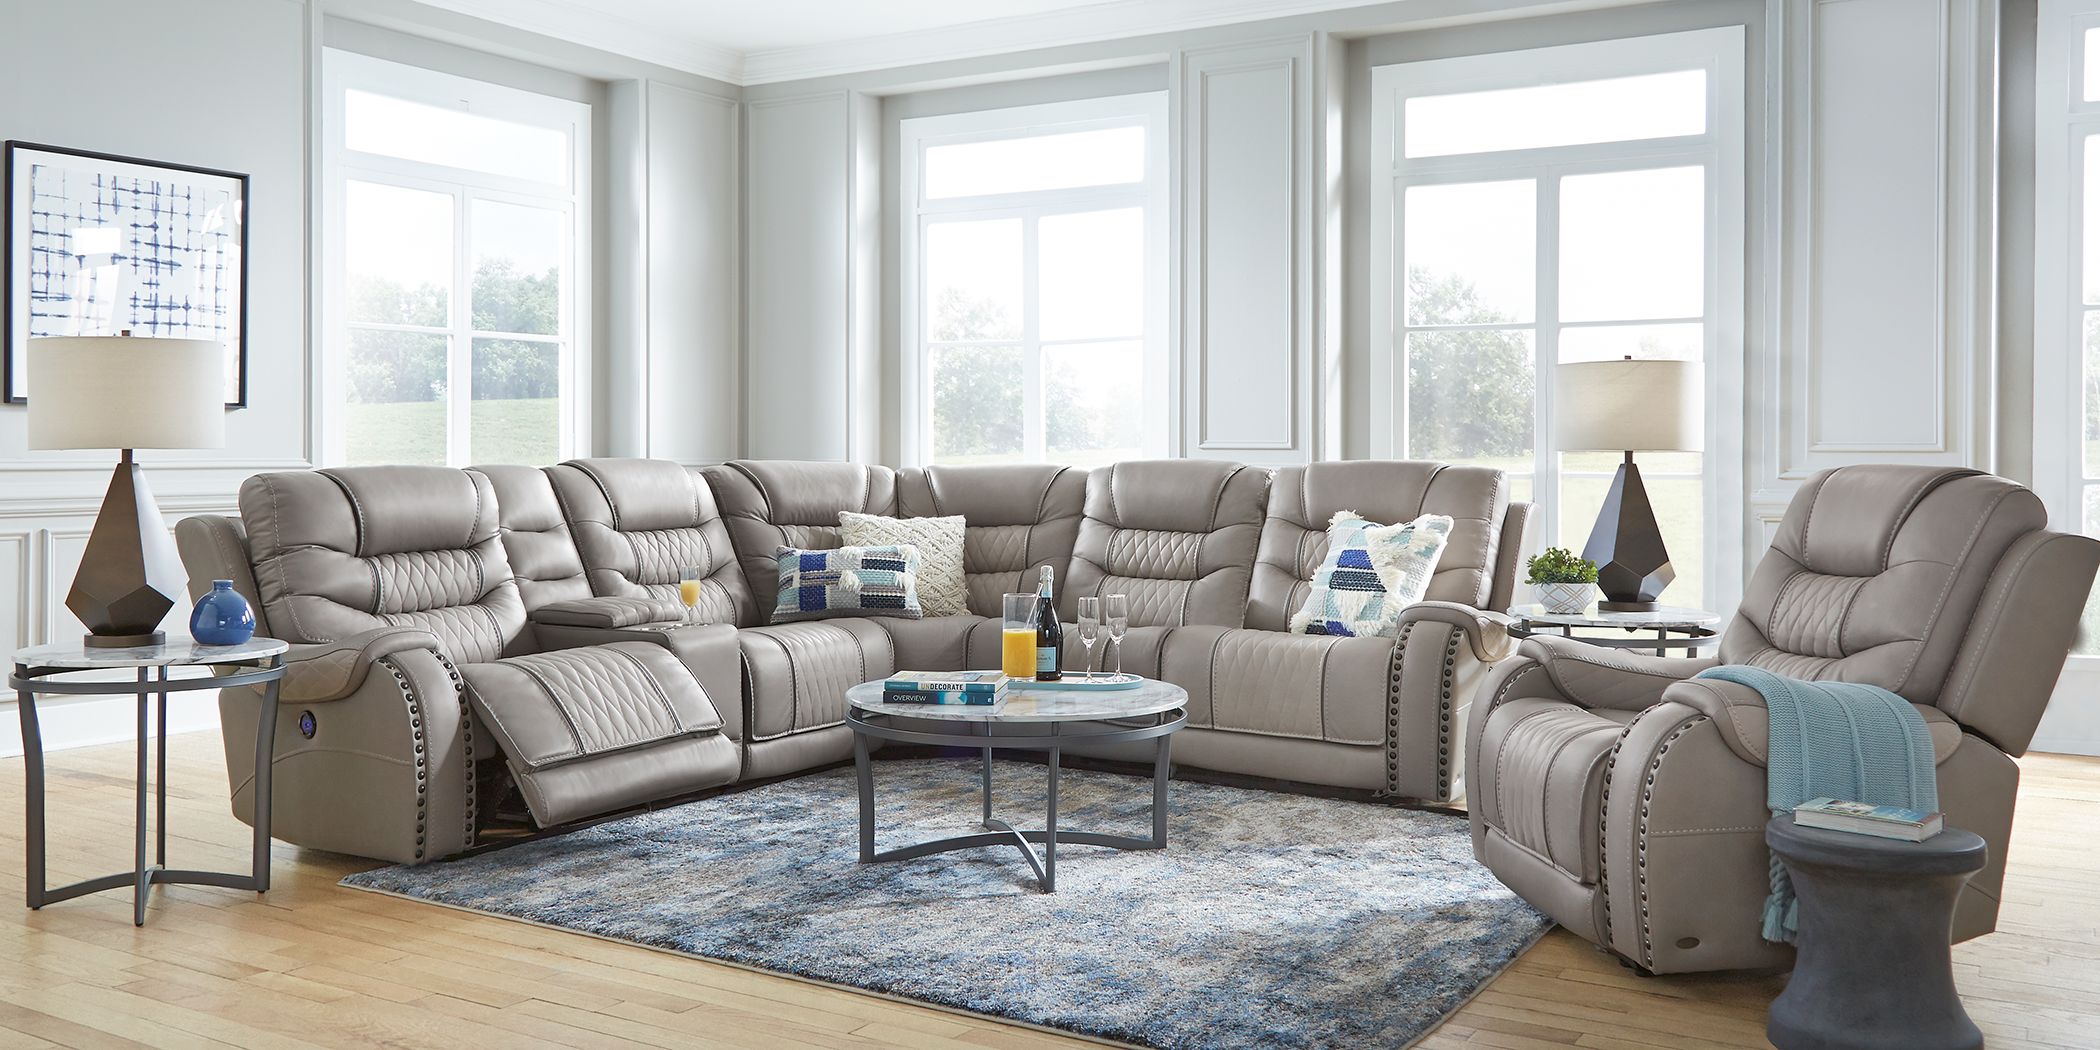 Leather Sectional Sofas L Shaped Couch, Leather Reclining Sectionals